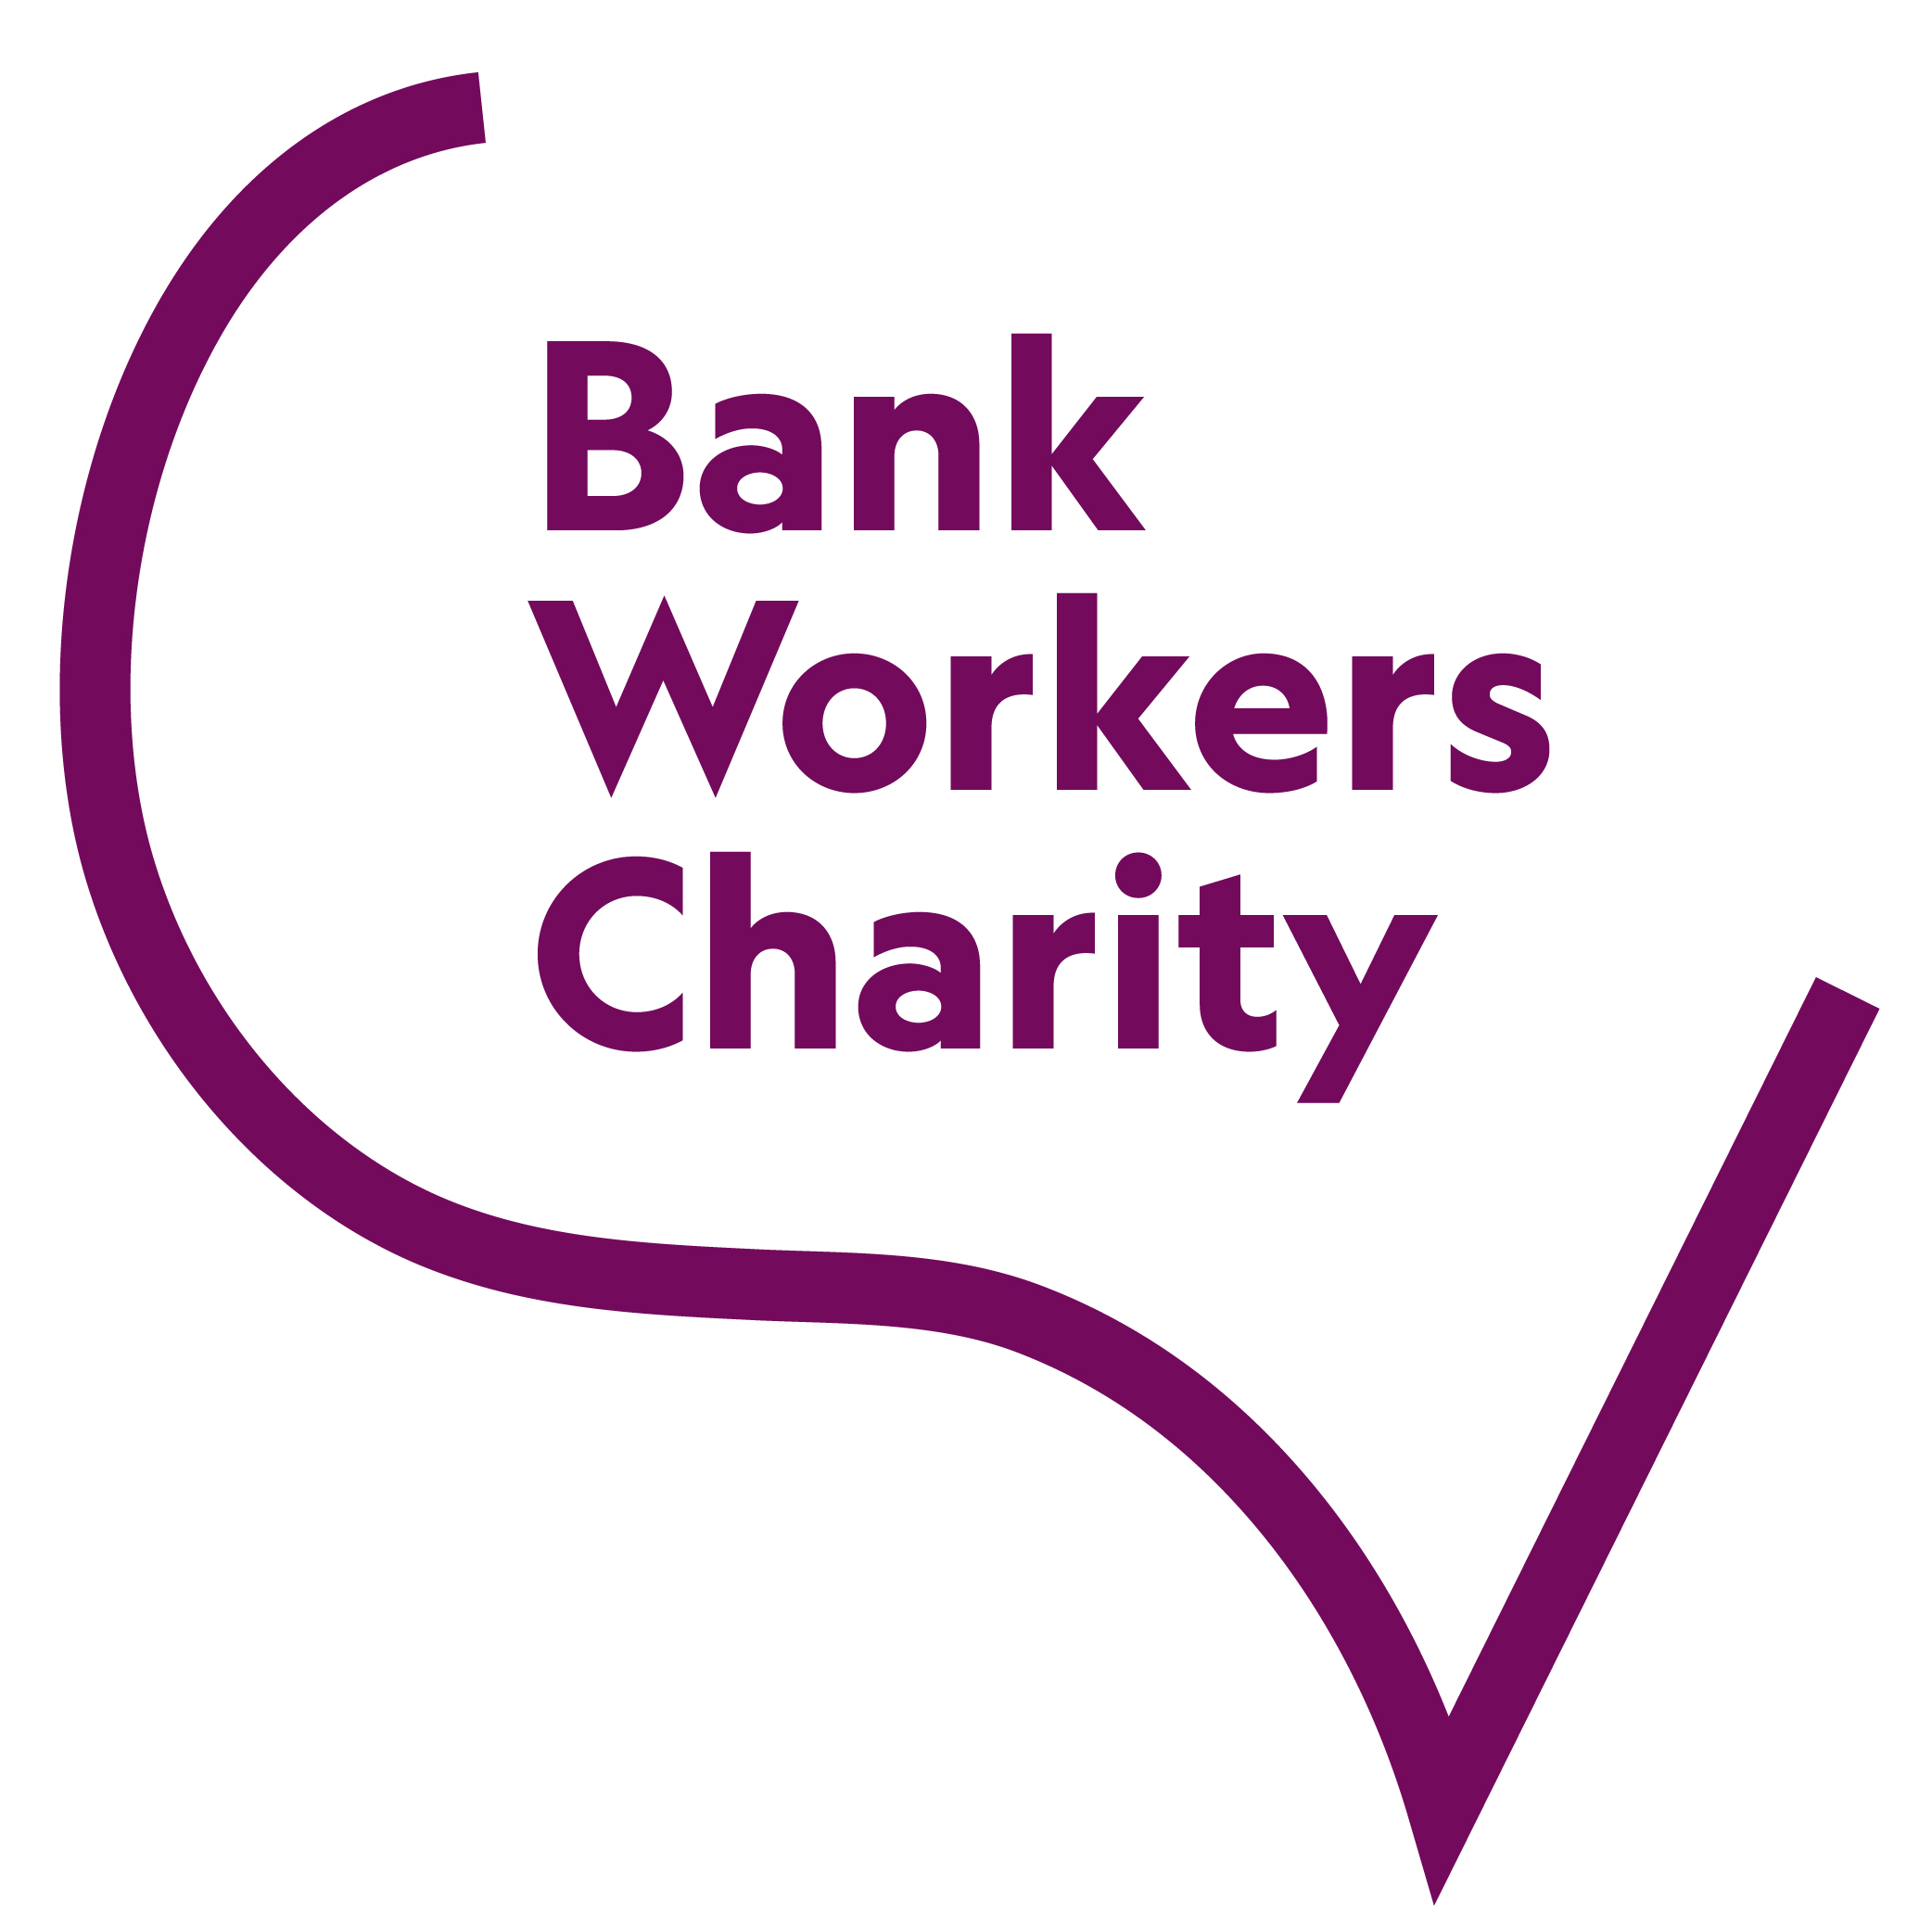 the bank workers charity logo